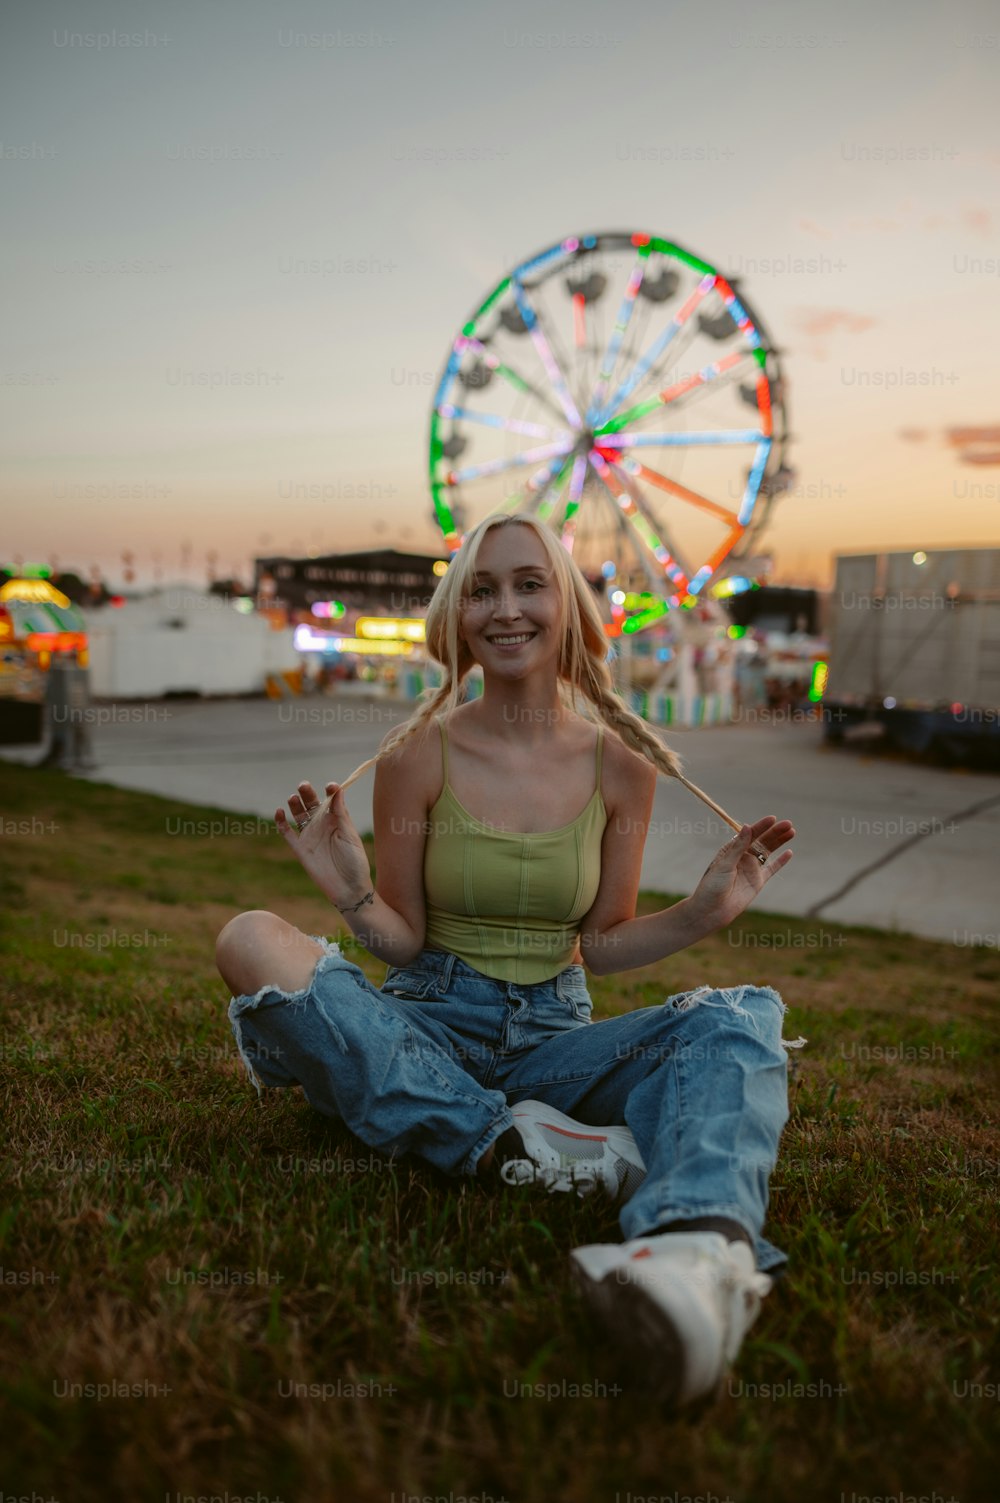 a woman sitting on the grass in front of a ferris wheel